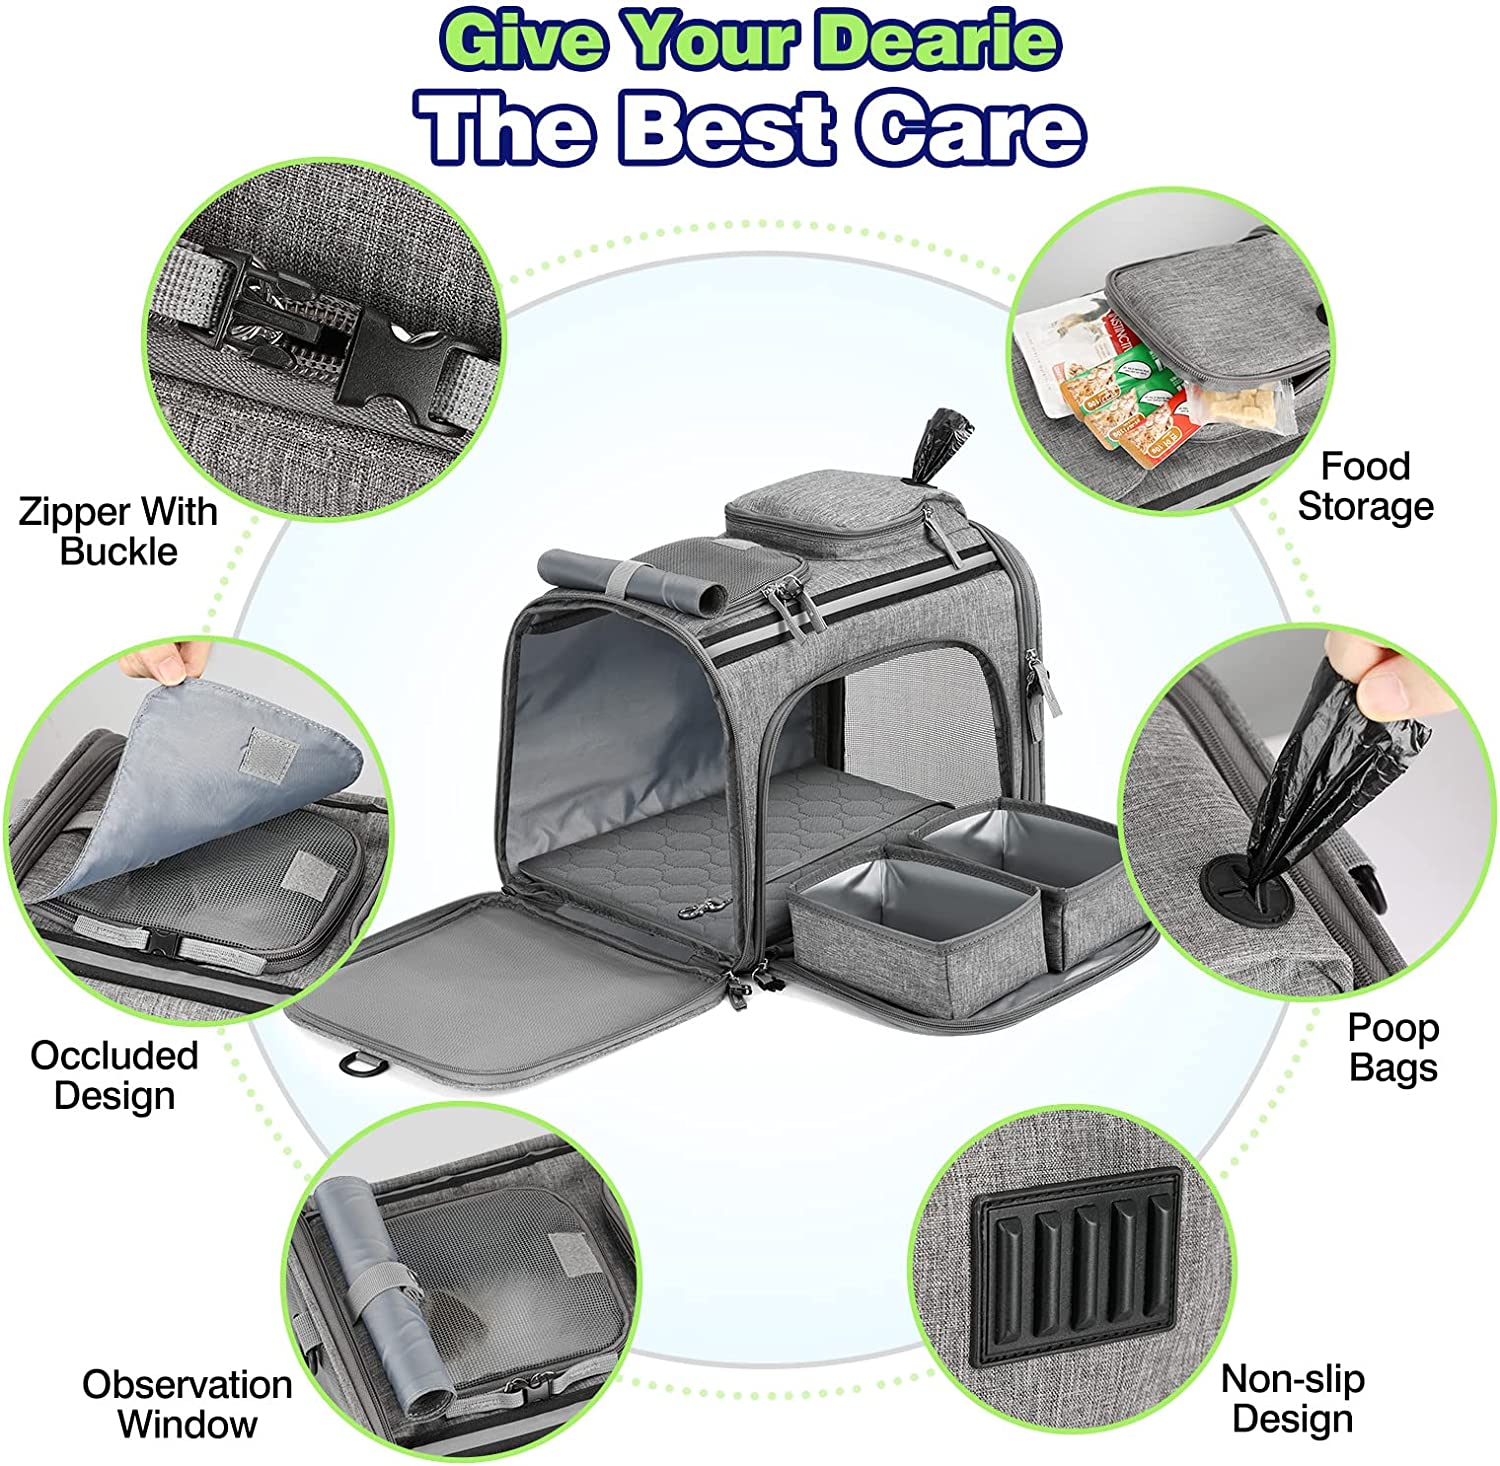 Petlo Pet Carrier Bag with Mattress, Airplane Approved 